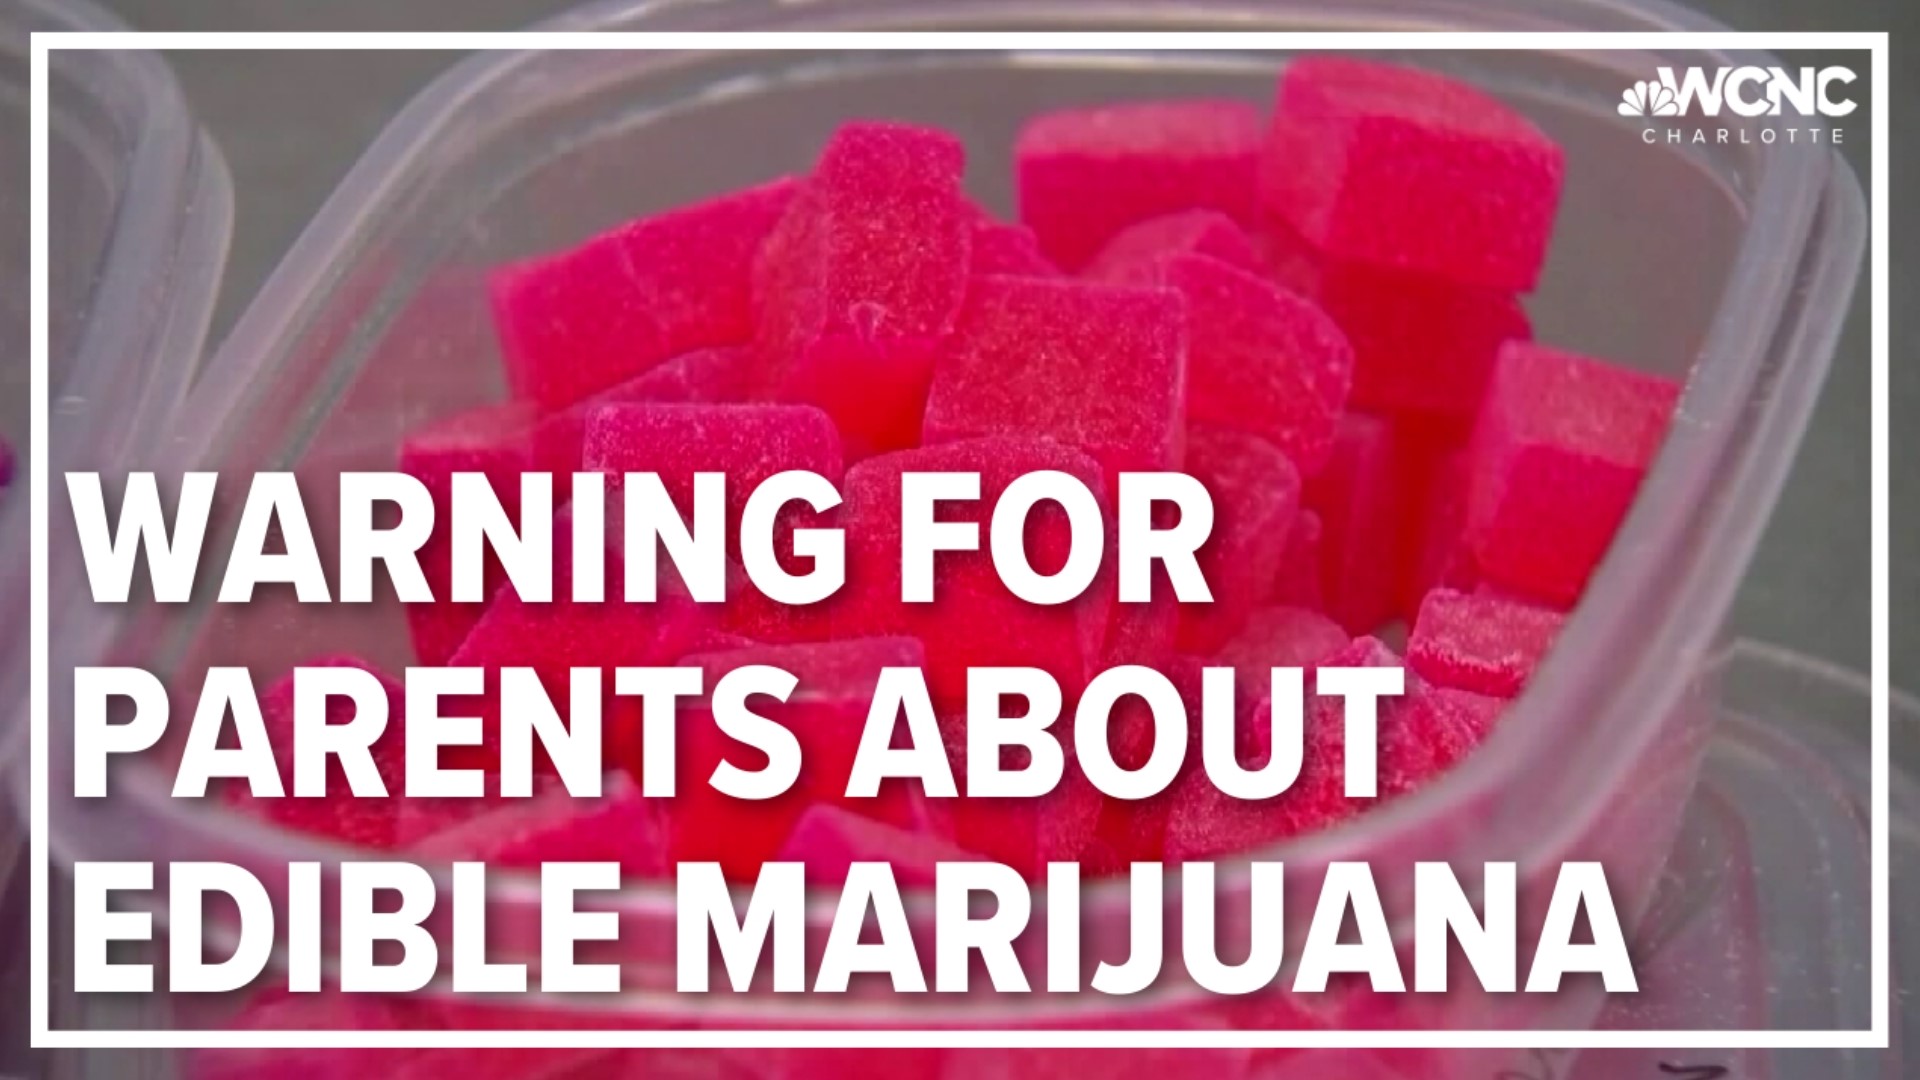 An urgent warning for parents about the dangers of edible marijuana.